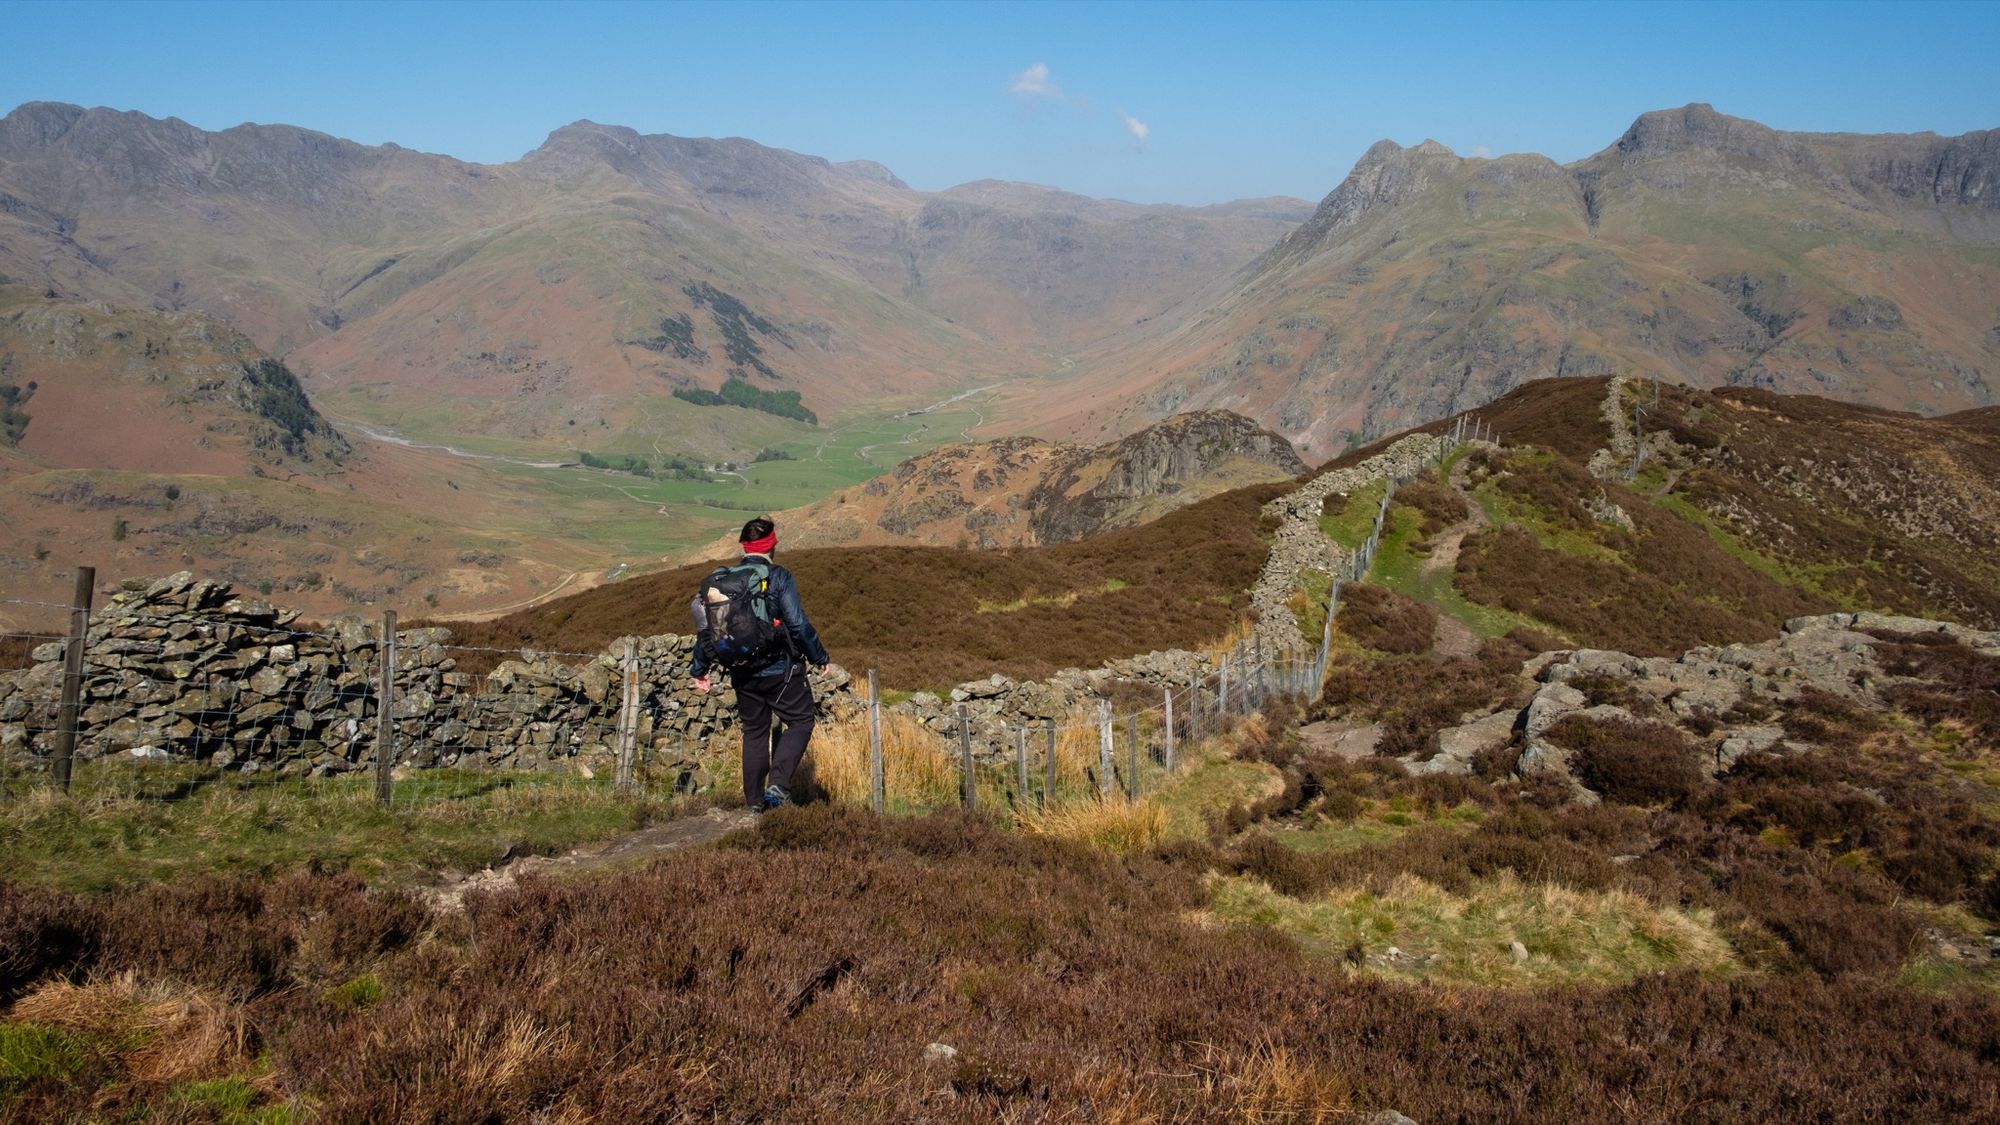 Langdale's skyline is well seen from Lingmoor Fell: Crinkle Crags, Bowfell and the Langdale Pikes